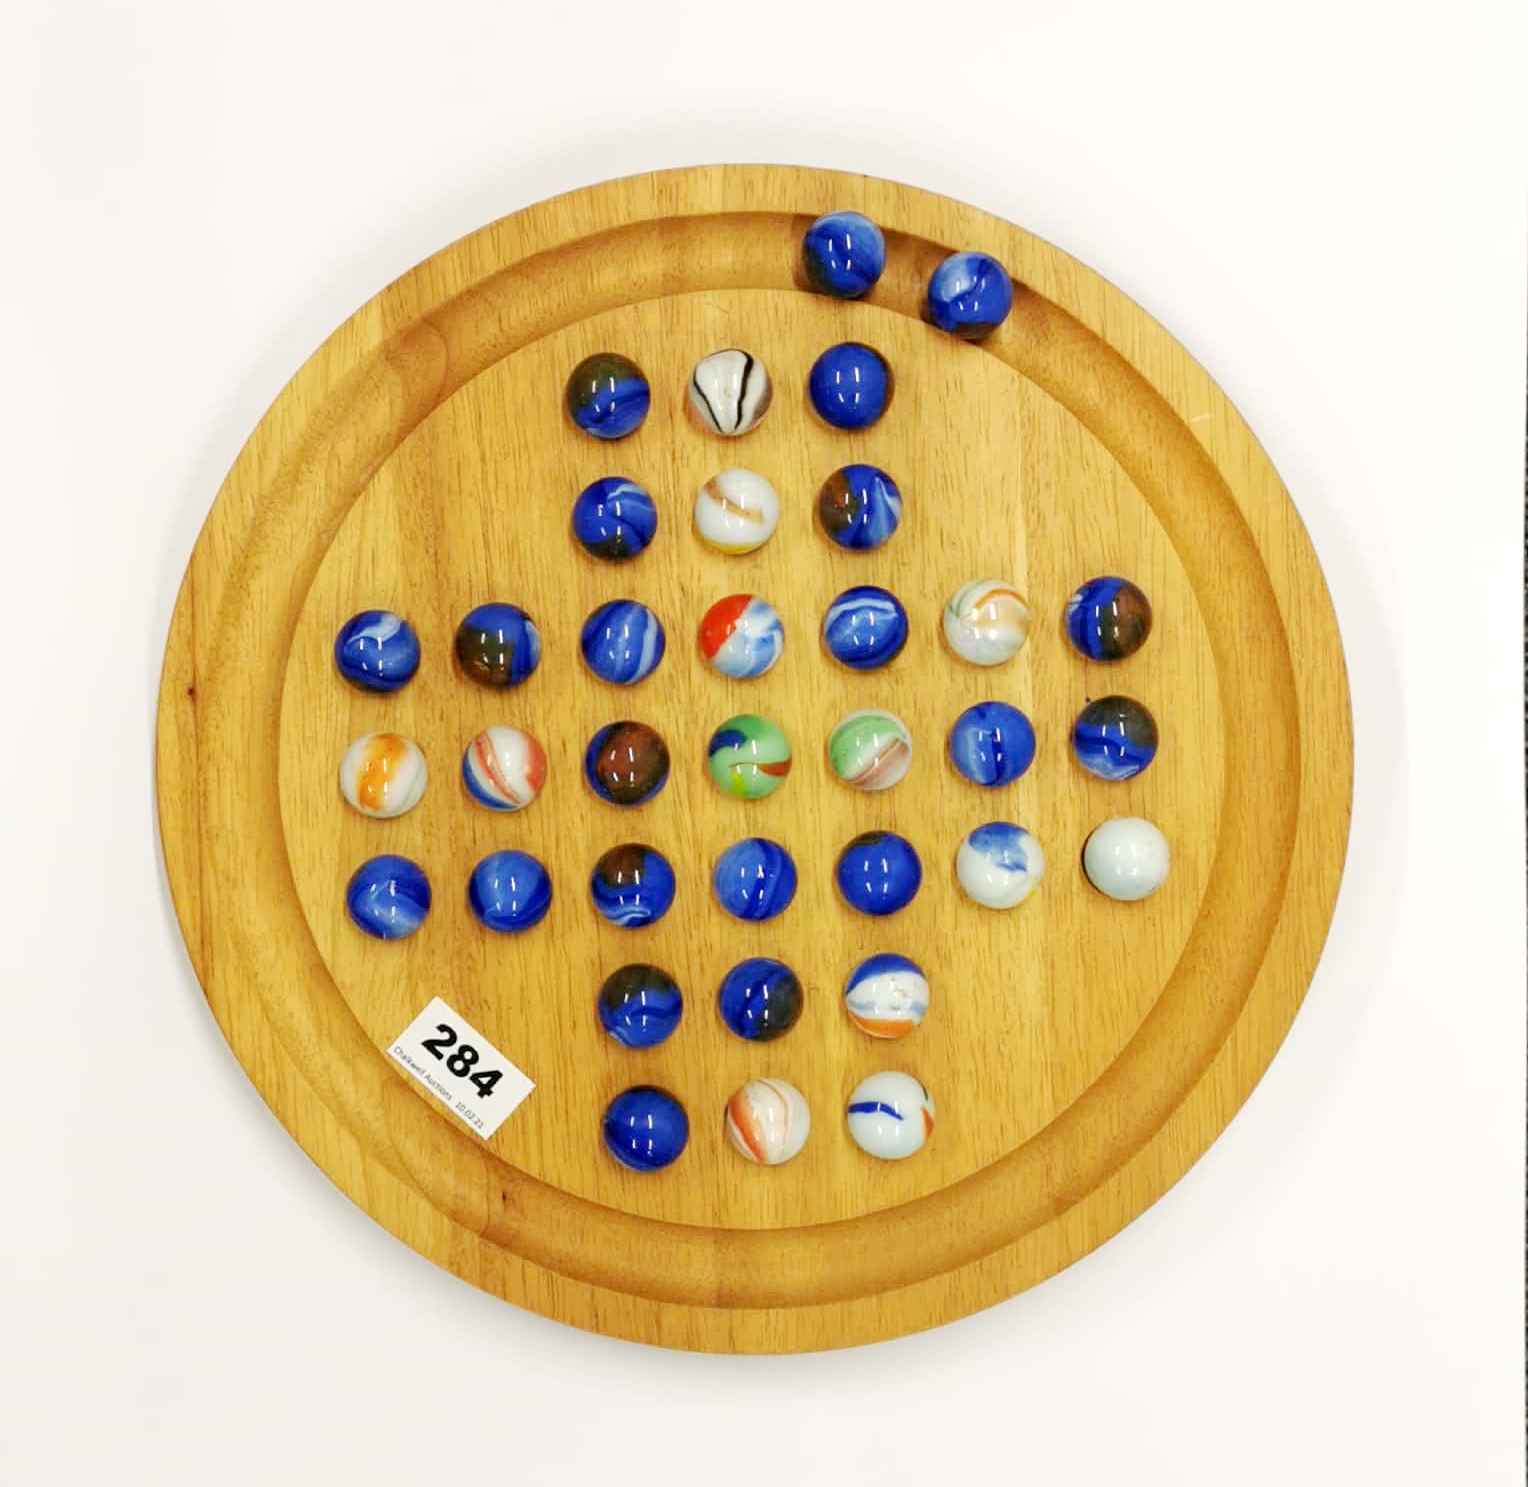 A wood and large glass marble solitaire game, dia. 34cm, marble dia. 2.5cm.